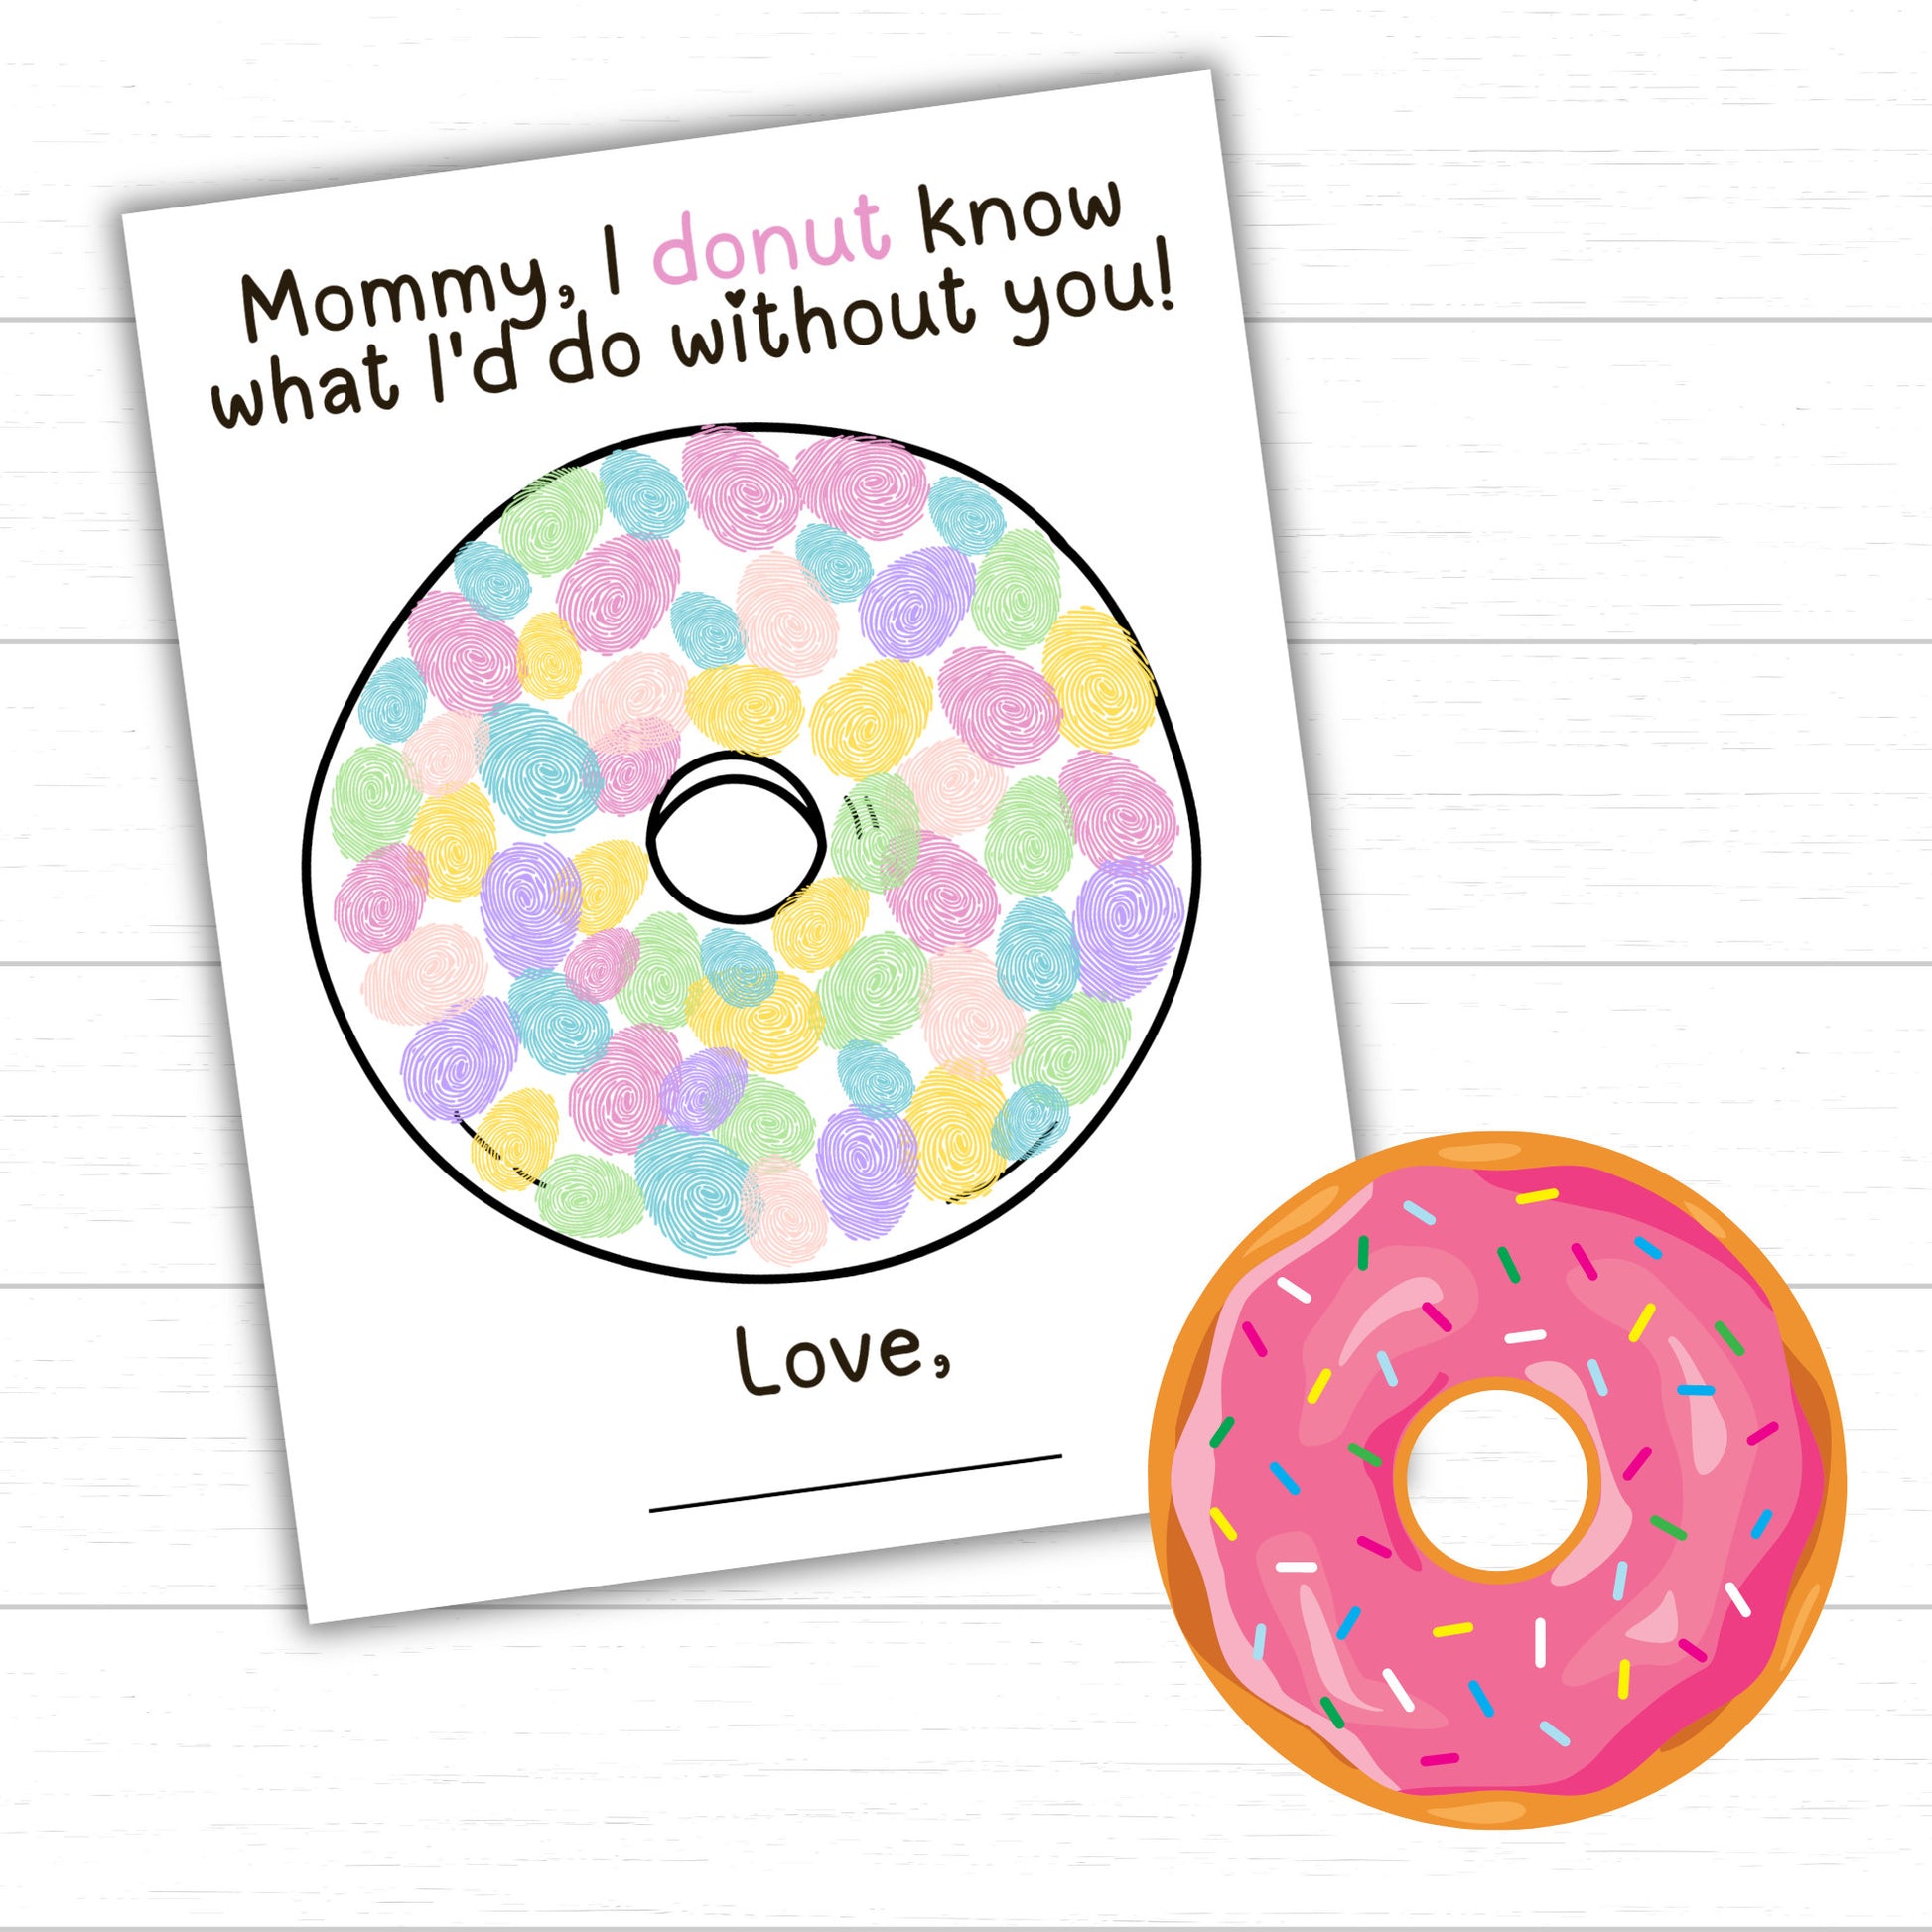 Mother's Day Donut Fingerprint Art, I Donut Know What I'd Do Without You, Mother's Day Craft, Mother's Day Gift Idea, Mother's Day Keepsake